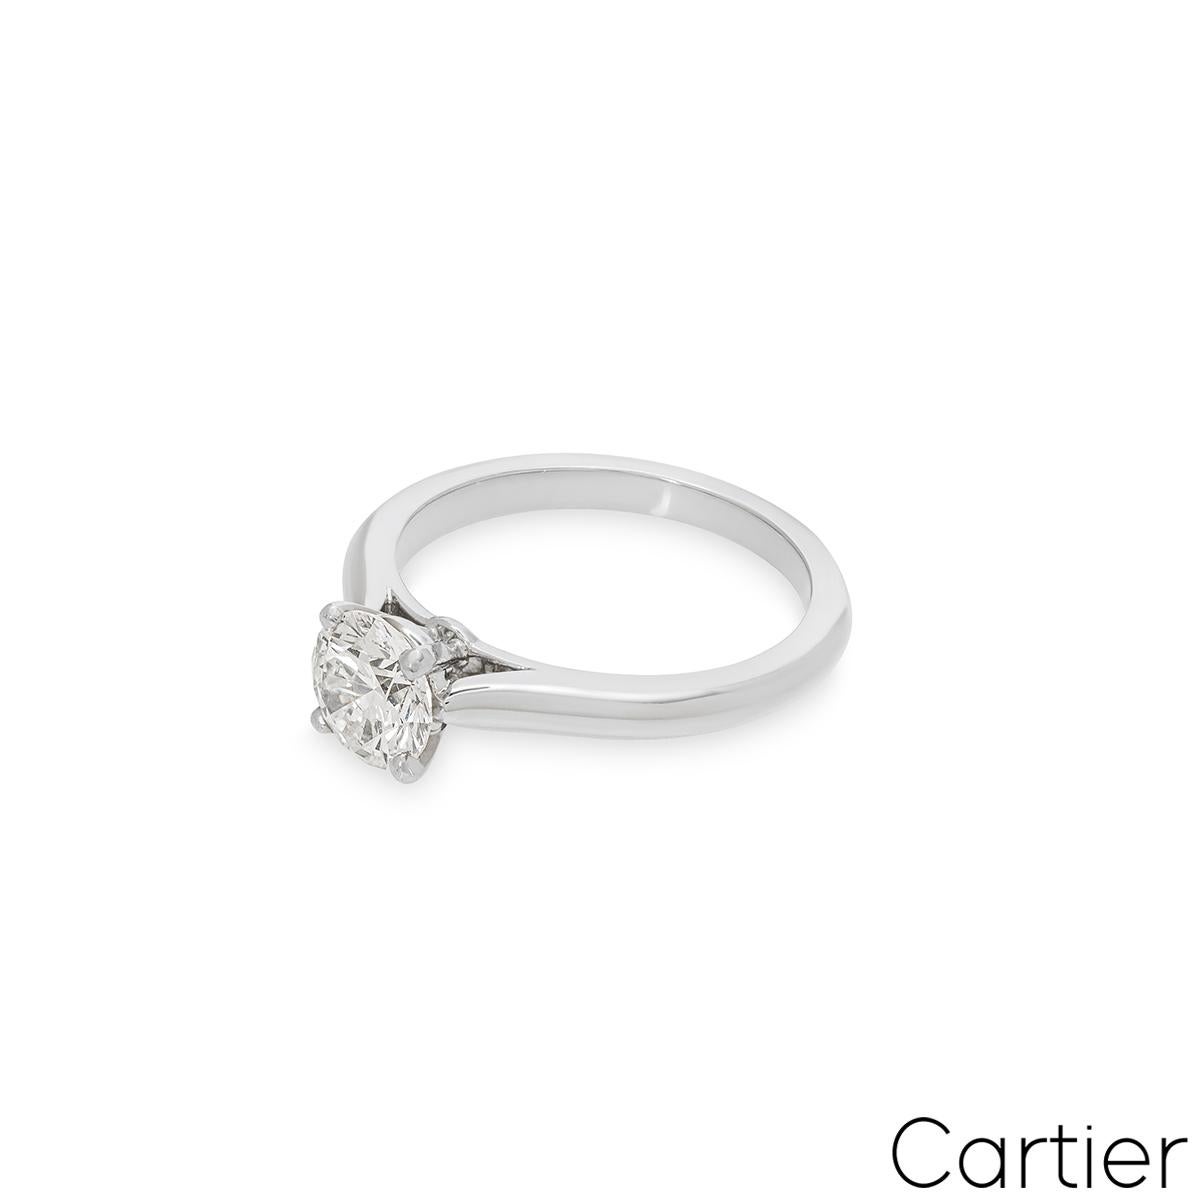 Cartier Platinum Diamond Solitaire 1895 Ring 1.21 Carat F/VVS1 In Excellent Condition For Sale In London, GB